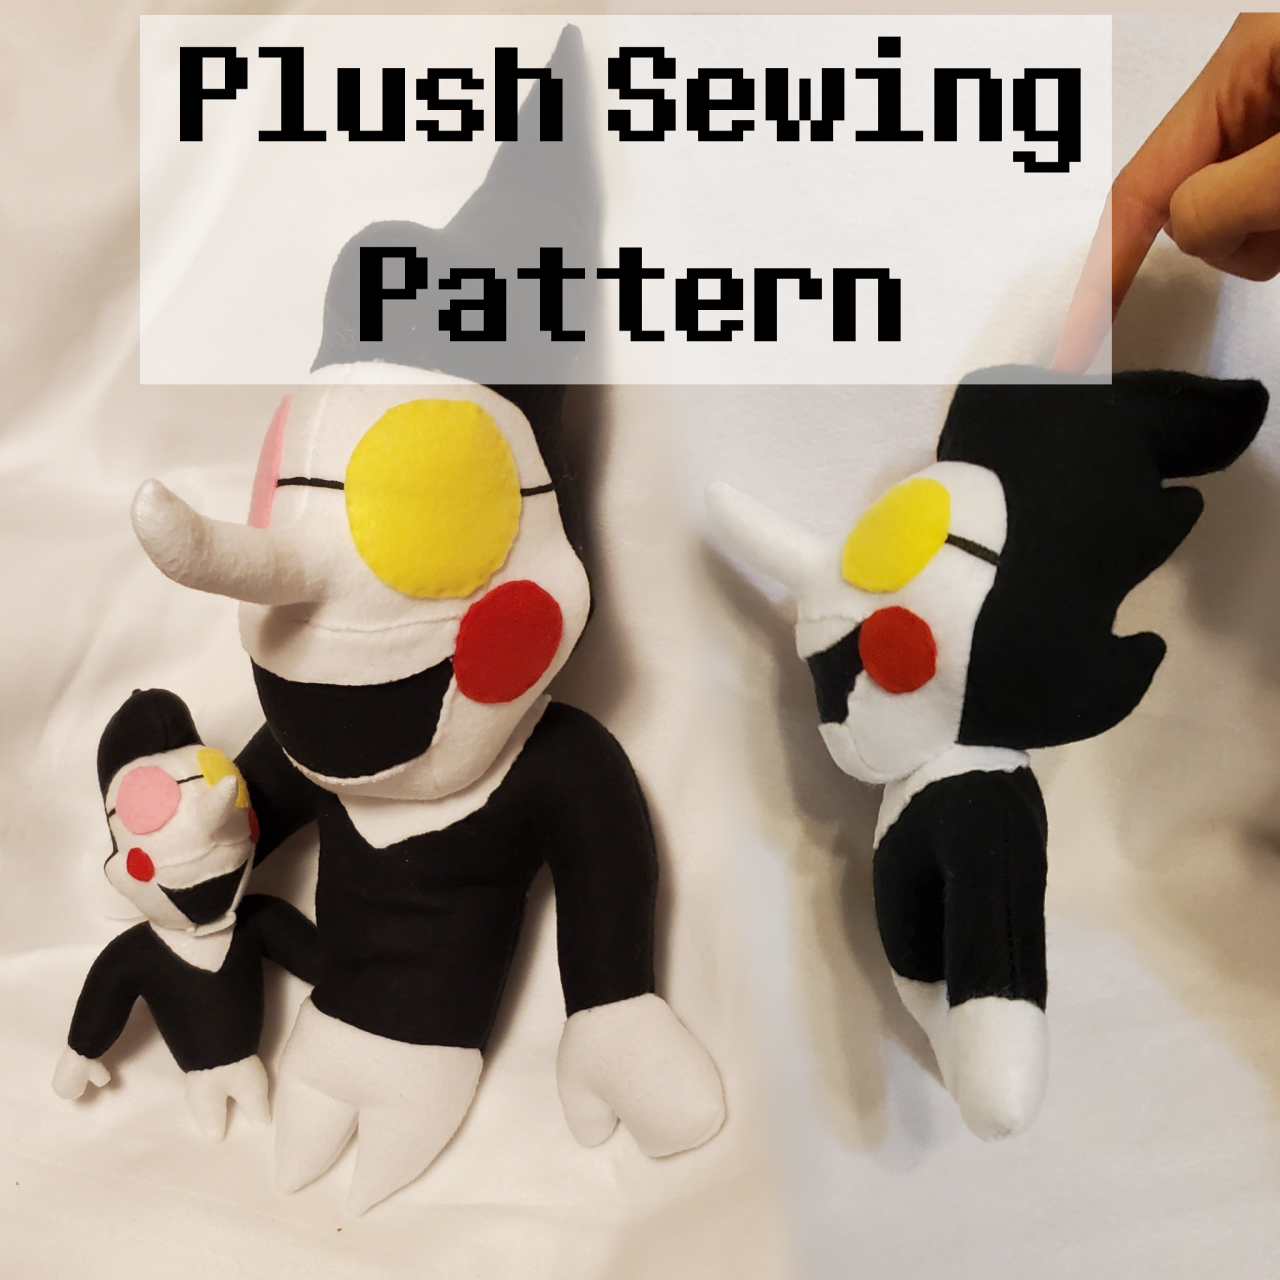 ⓓⓐⓨ✿ⓛⓘⓚⓔⓢ ✿ⓒⓞⓞⓚⓘⓔⓢ✿ — I just released a full tutorial and sewing pattern